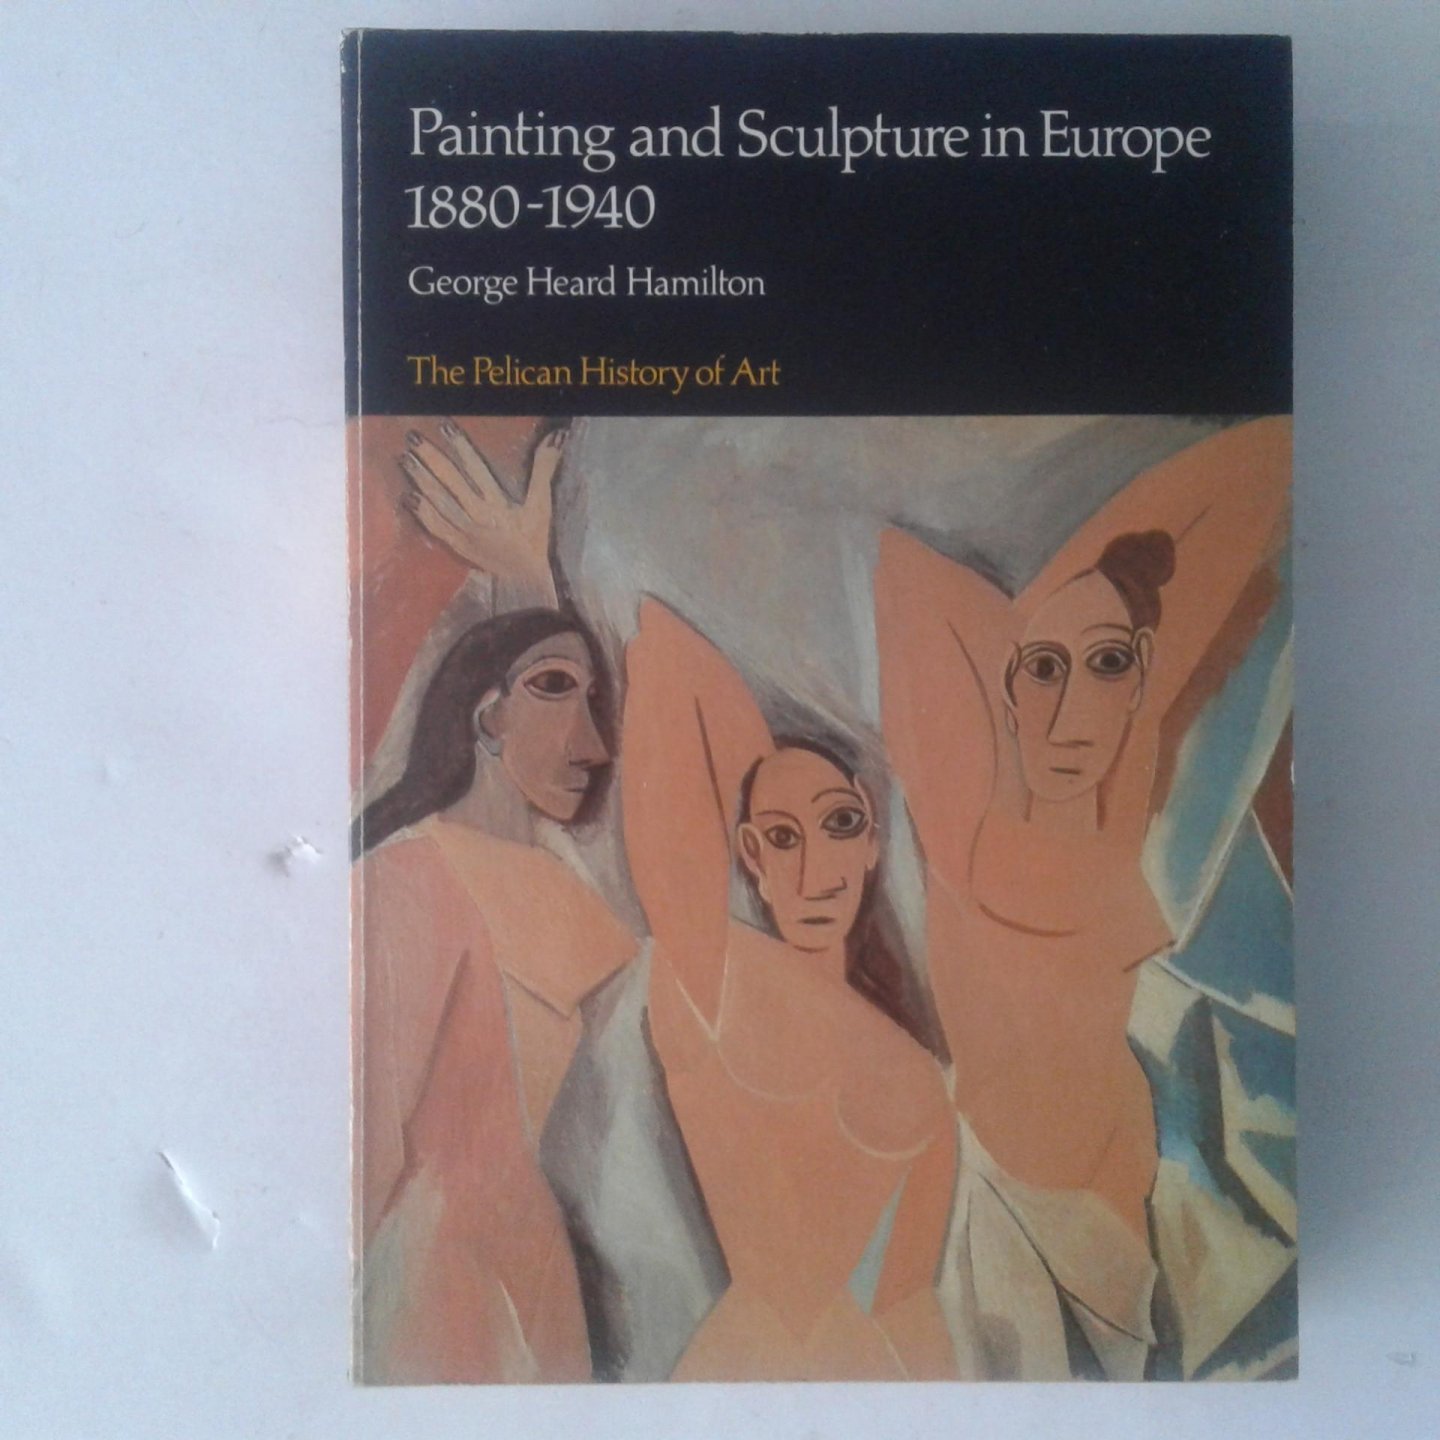 Hamilton, George Heard - Painting and Sculpture in Europe 1880-1940